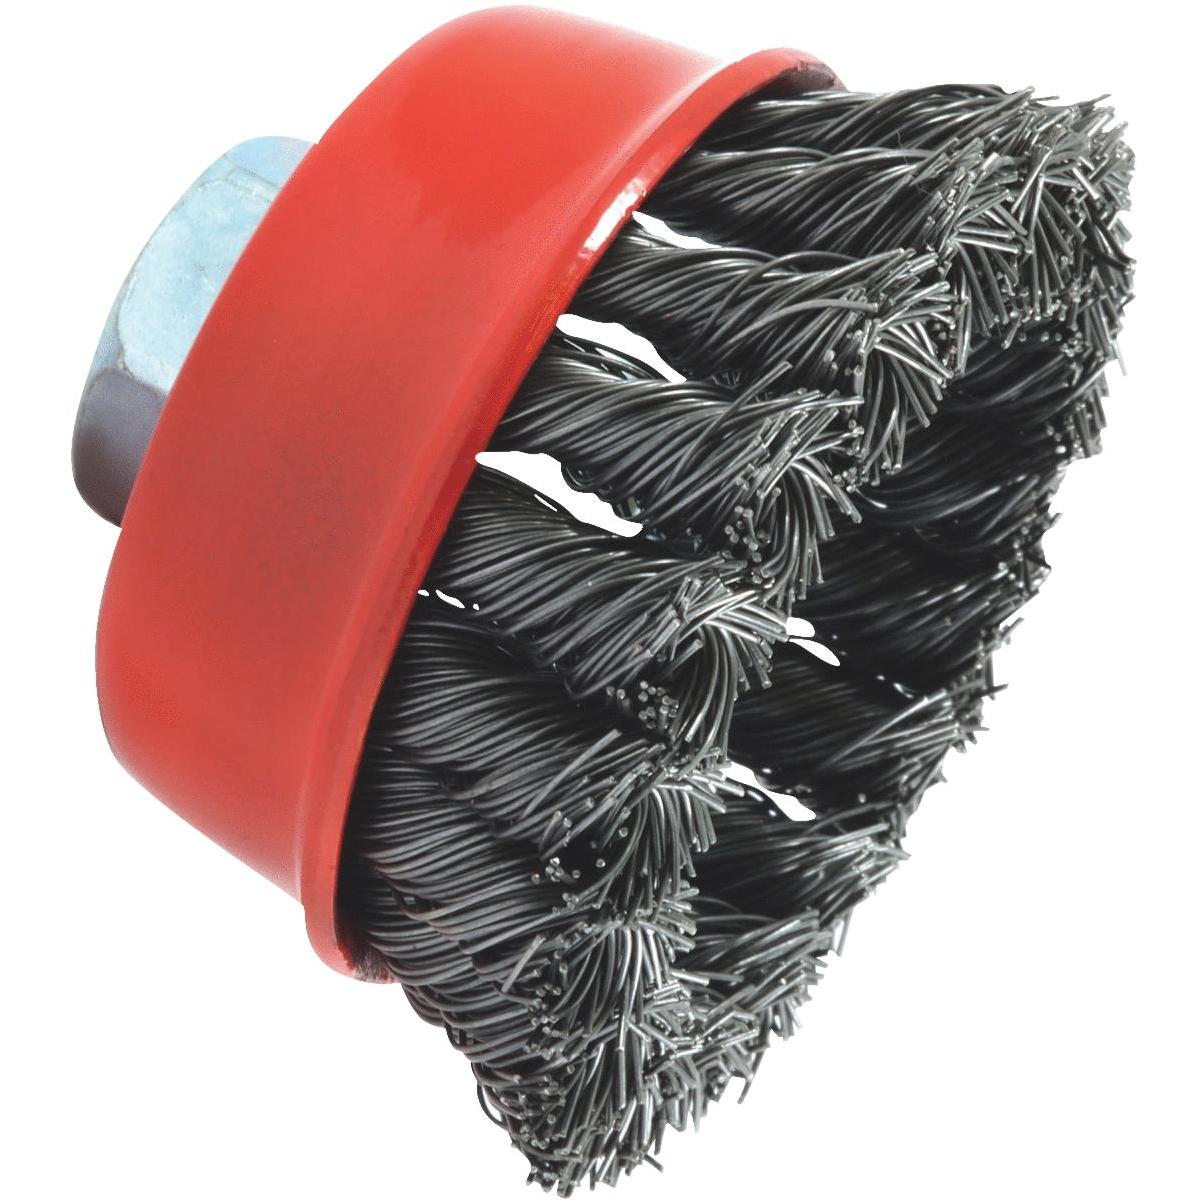 Forney 70508 Heavy Duty Parts Cleaning Brush 10-1/2 Inch: Wire